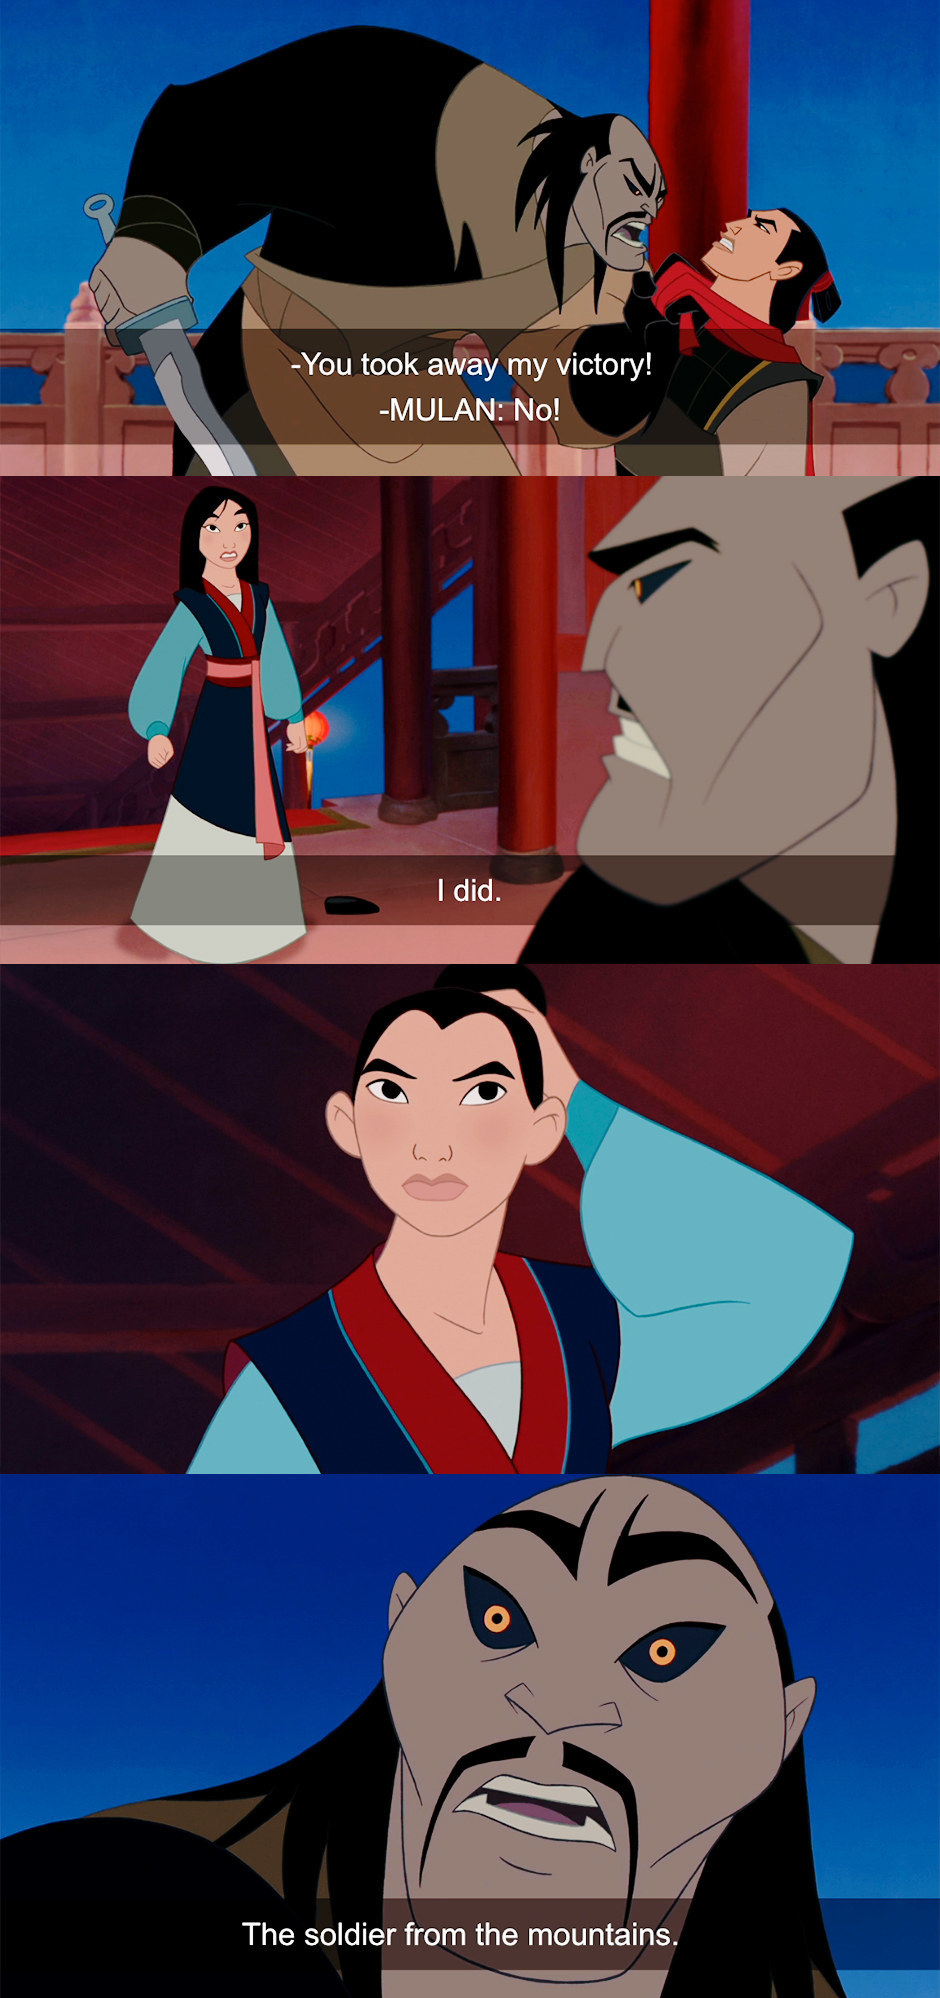 Mulan exposing herself as a woman to the other soldiers